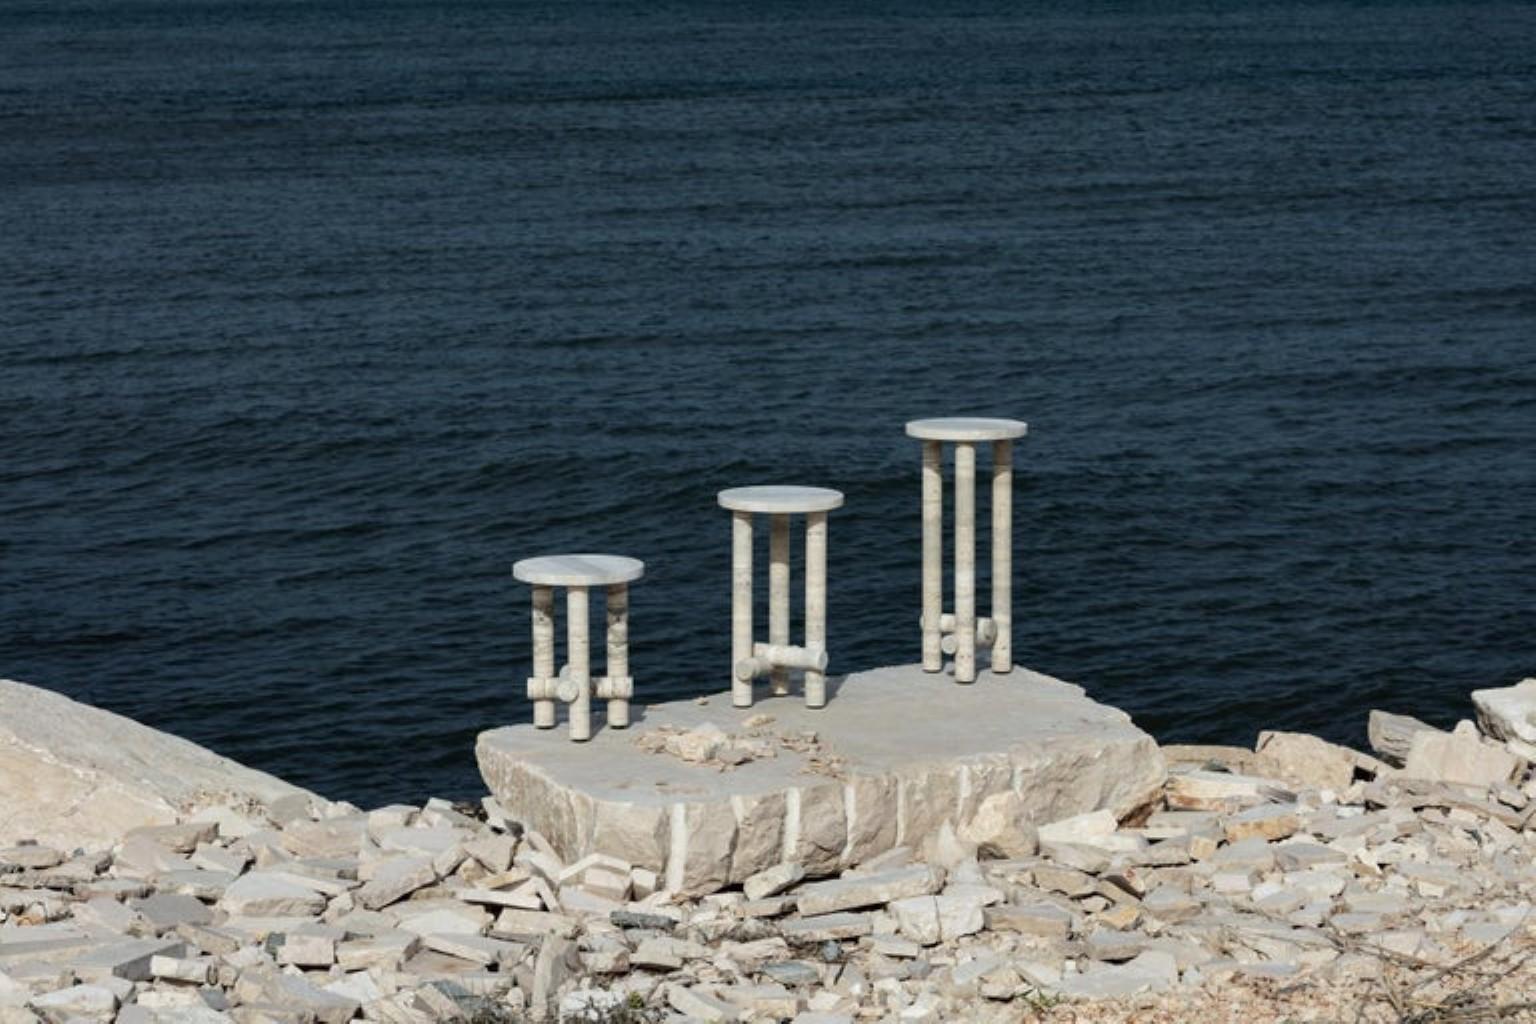 Ensemble of travertine side tables by Clement Brazille
Material: Ocean travertine stone
Dimensions:
1. 32 x 25 x 25 cm
2. 45 x 25 x 25 cm
3. 52 x 25 x 25 cm.

Other dimensions or stones could be ordered for unique creations.

 Clement